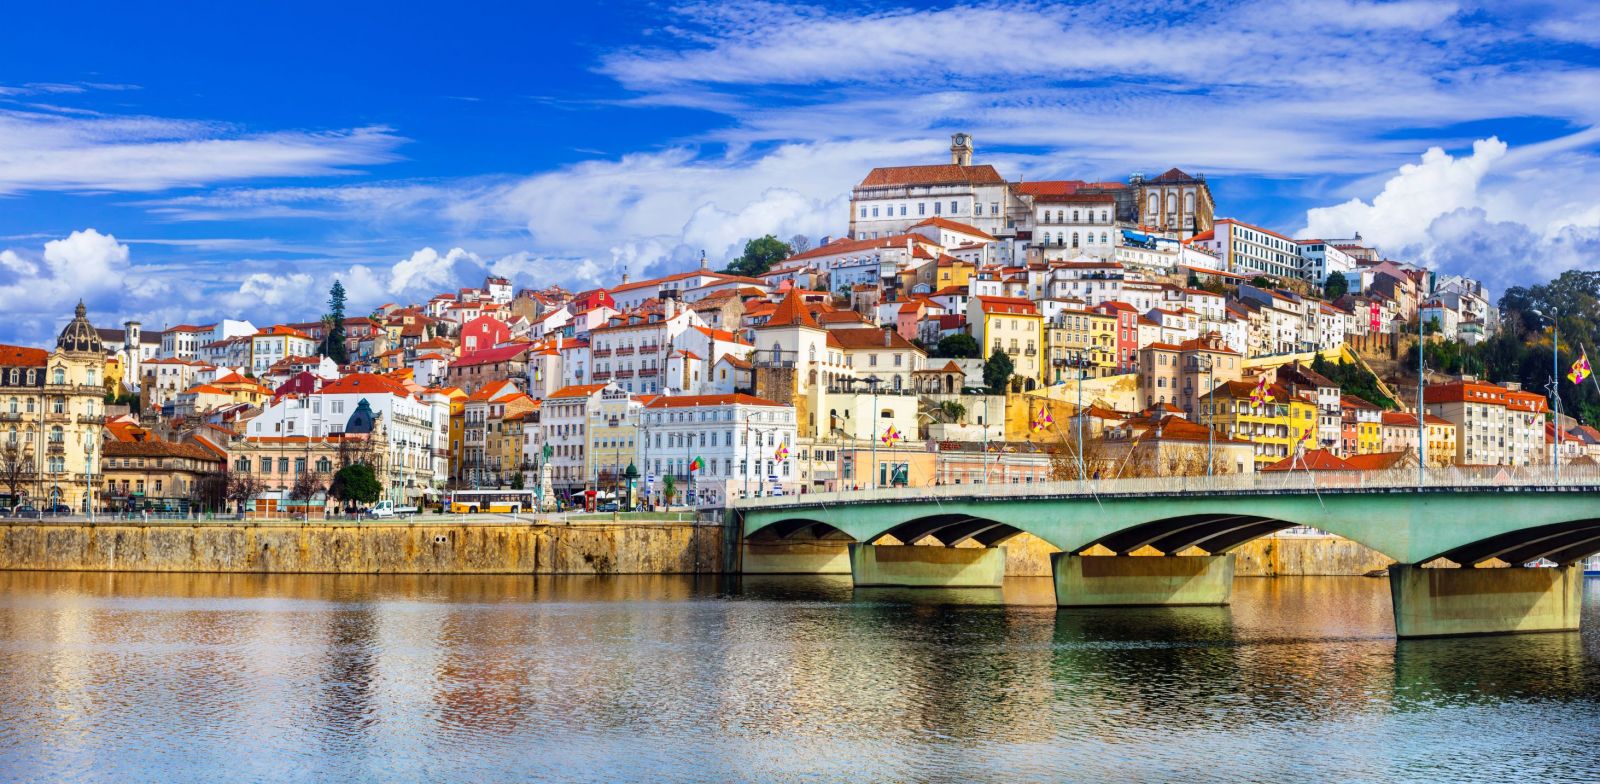 Panoramic view of Coimbra's old town.